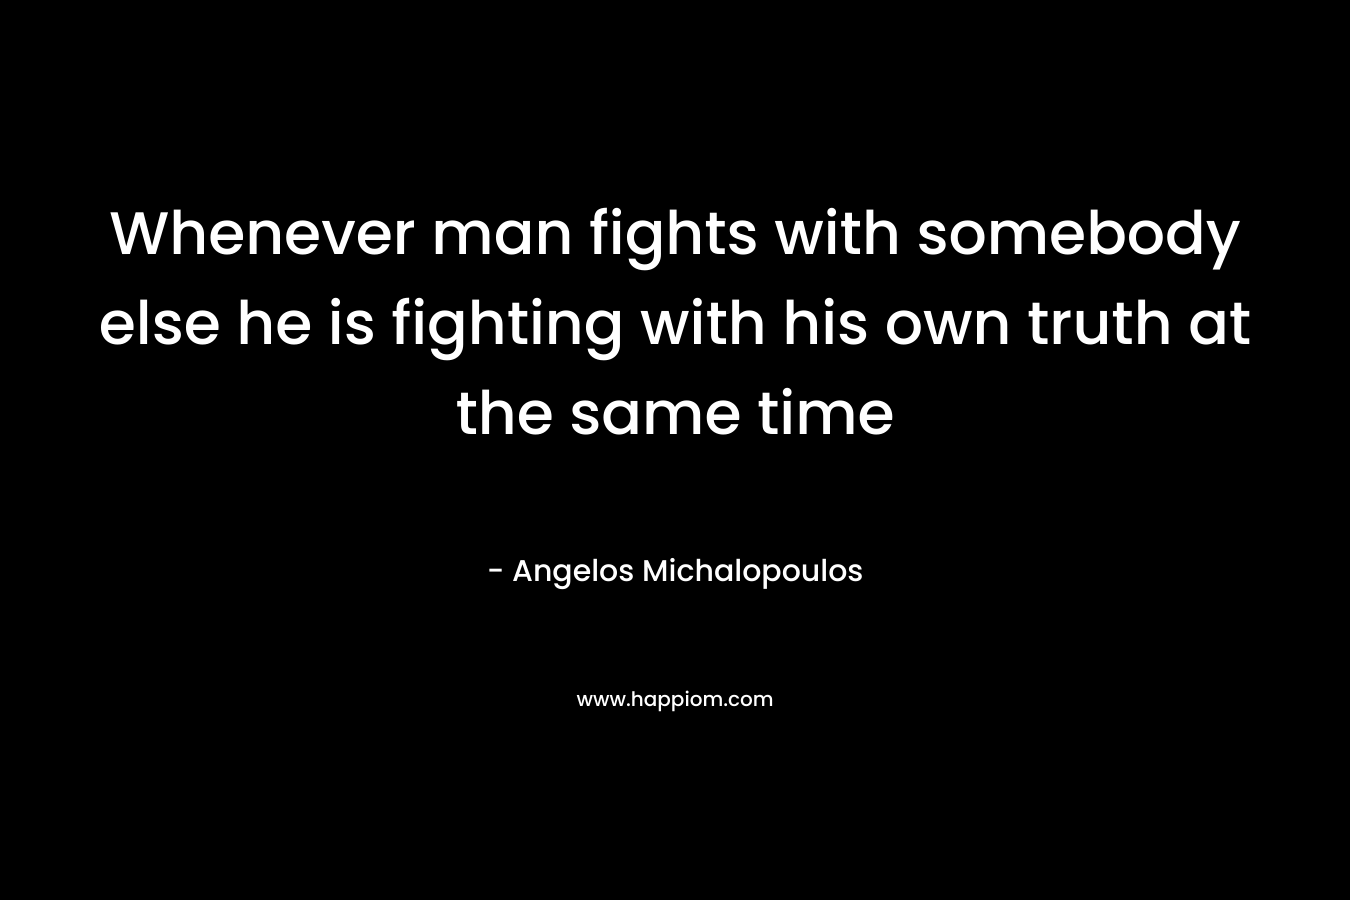 Whenever man fights with somebody else he is fighting with his own truth at the same time – Angelos Michalopoulos